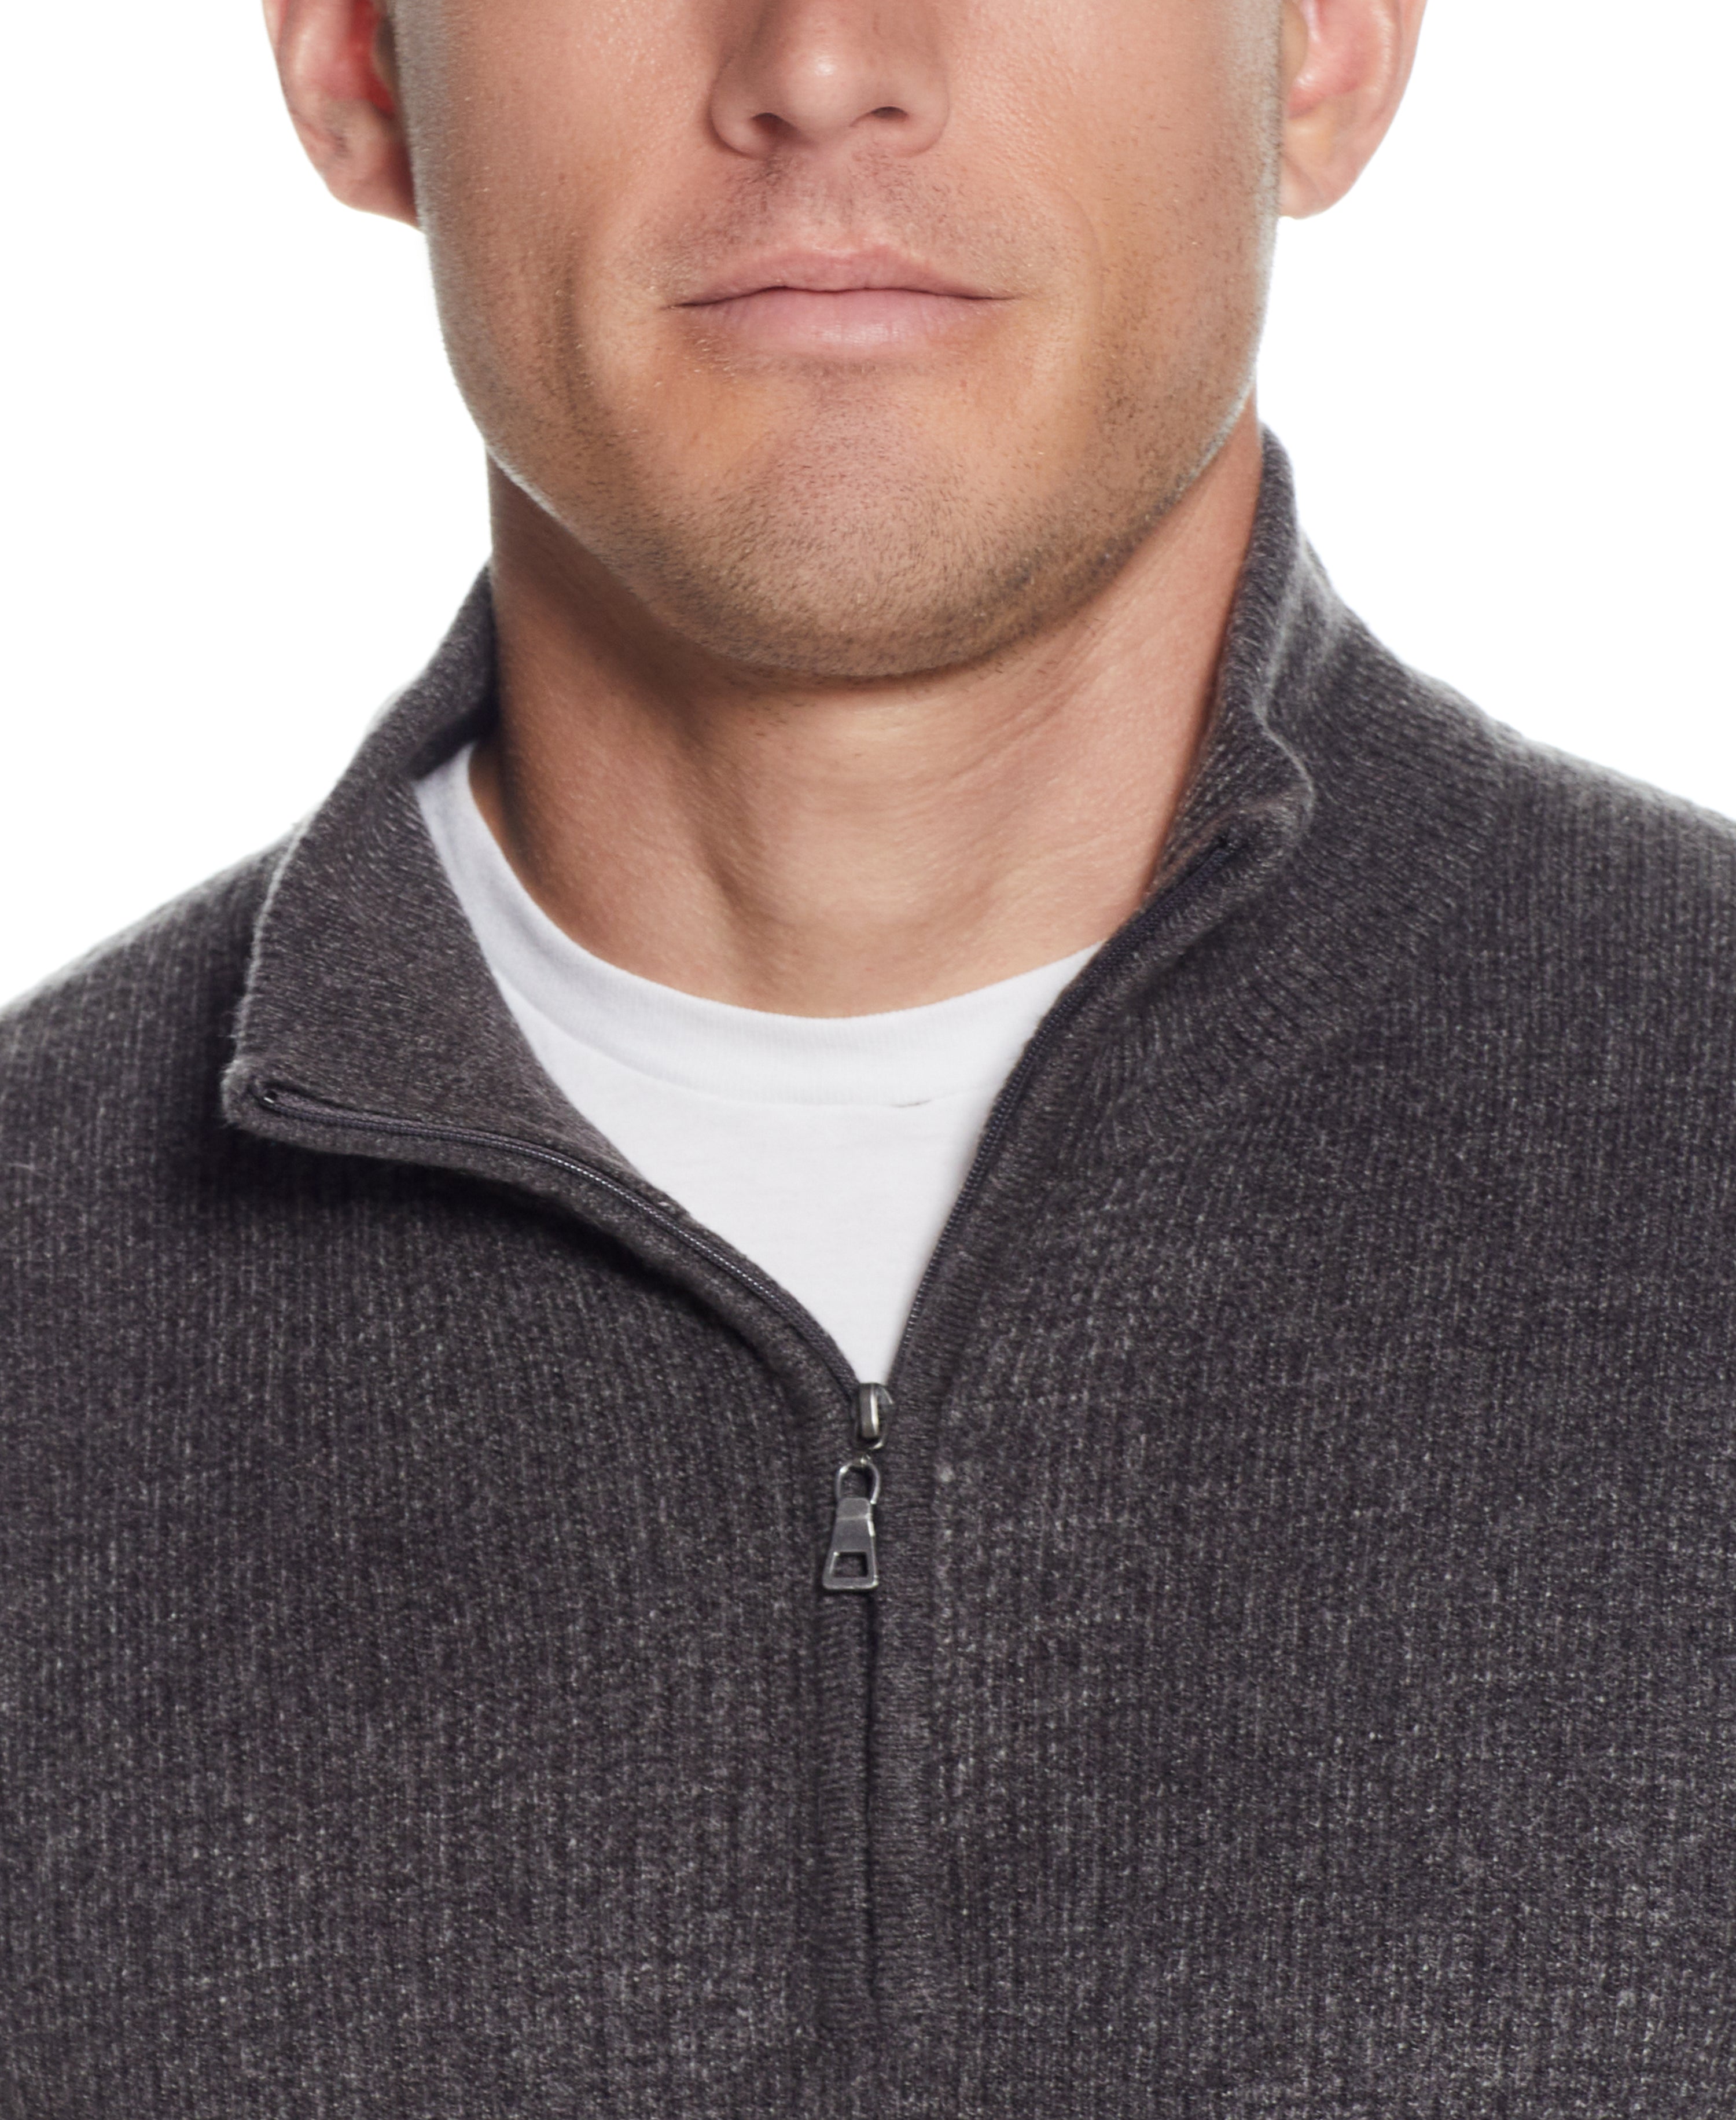 SOFT TOUCH WAFFLE 1/4 ZIP in PEWTER HEATHER